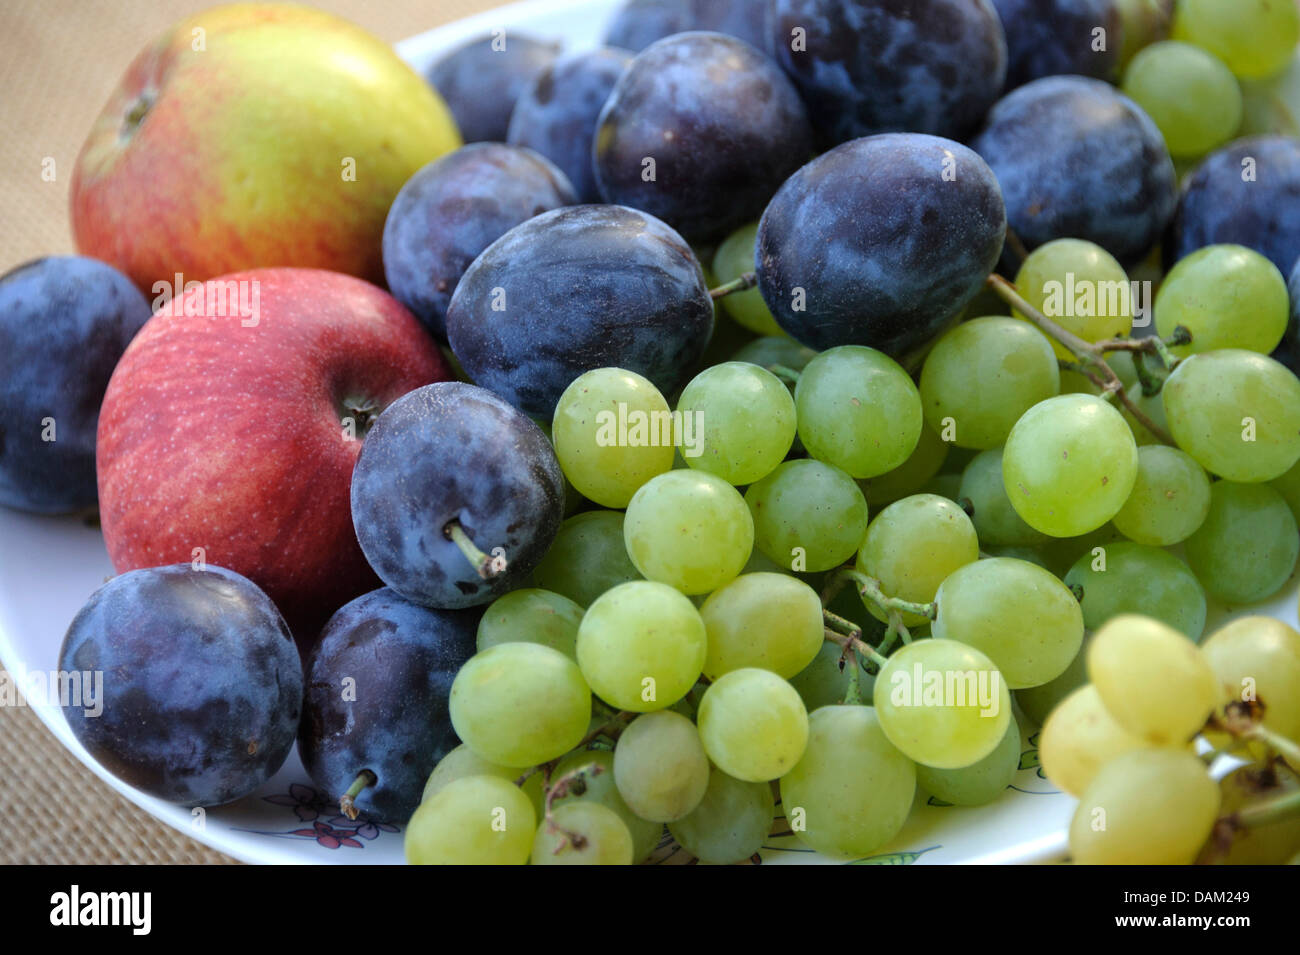 plums, apples and grapes on a plate Stock Photo